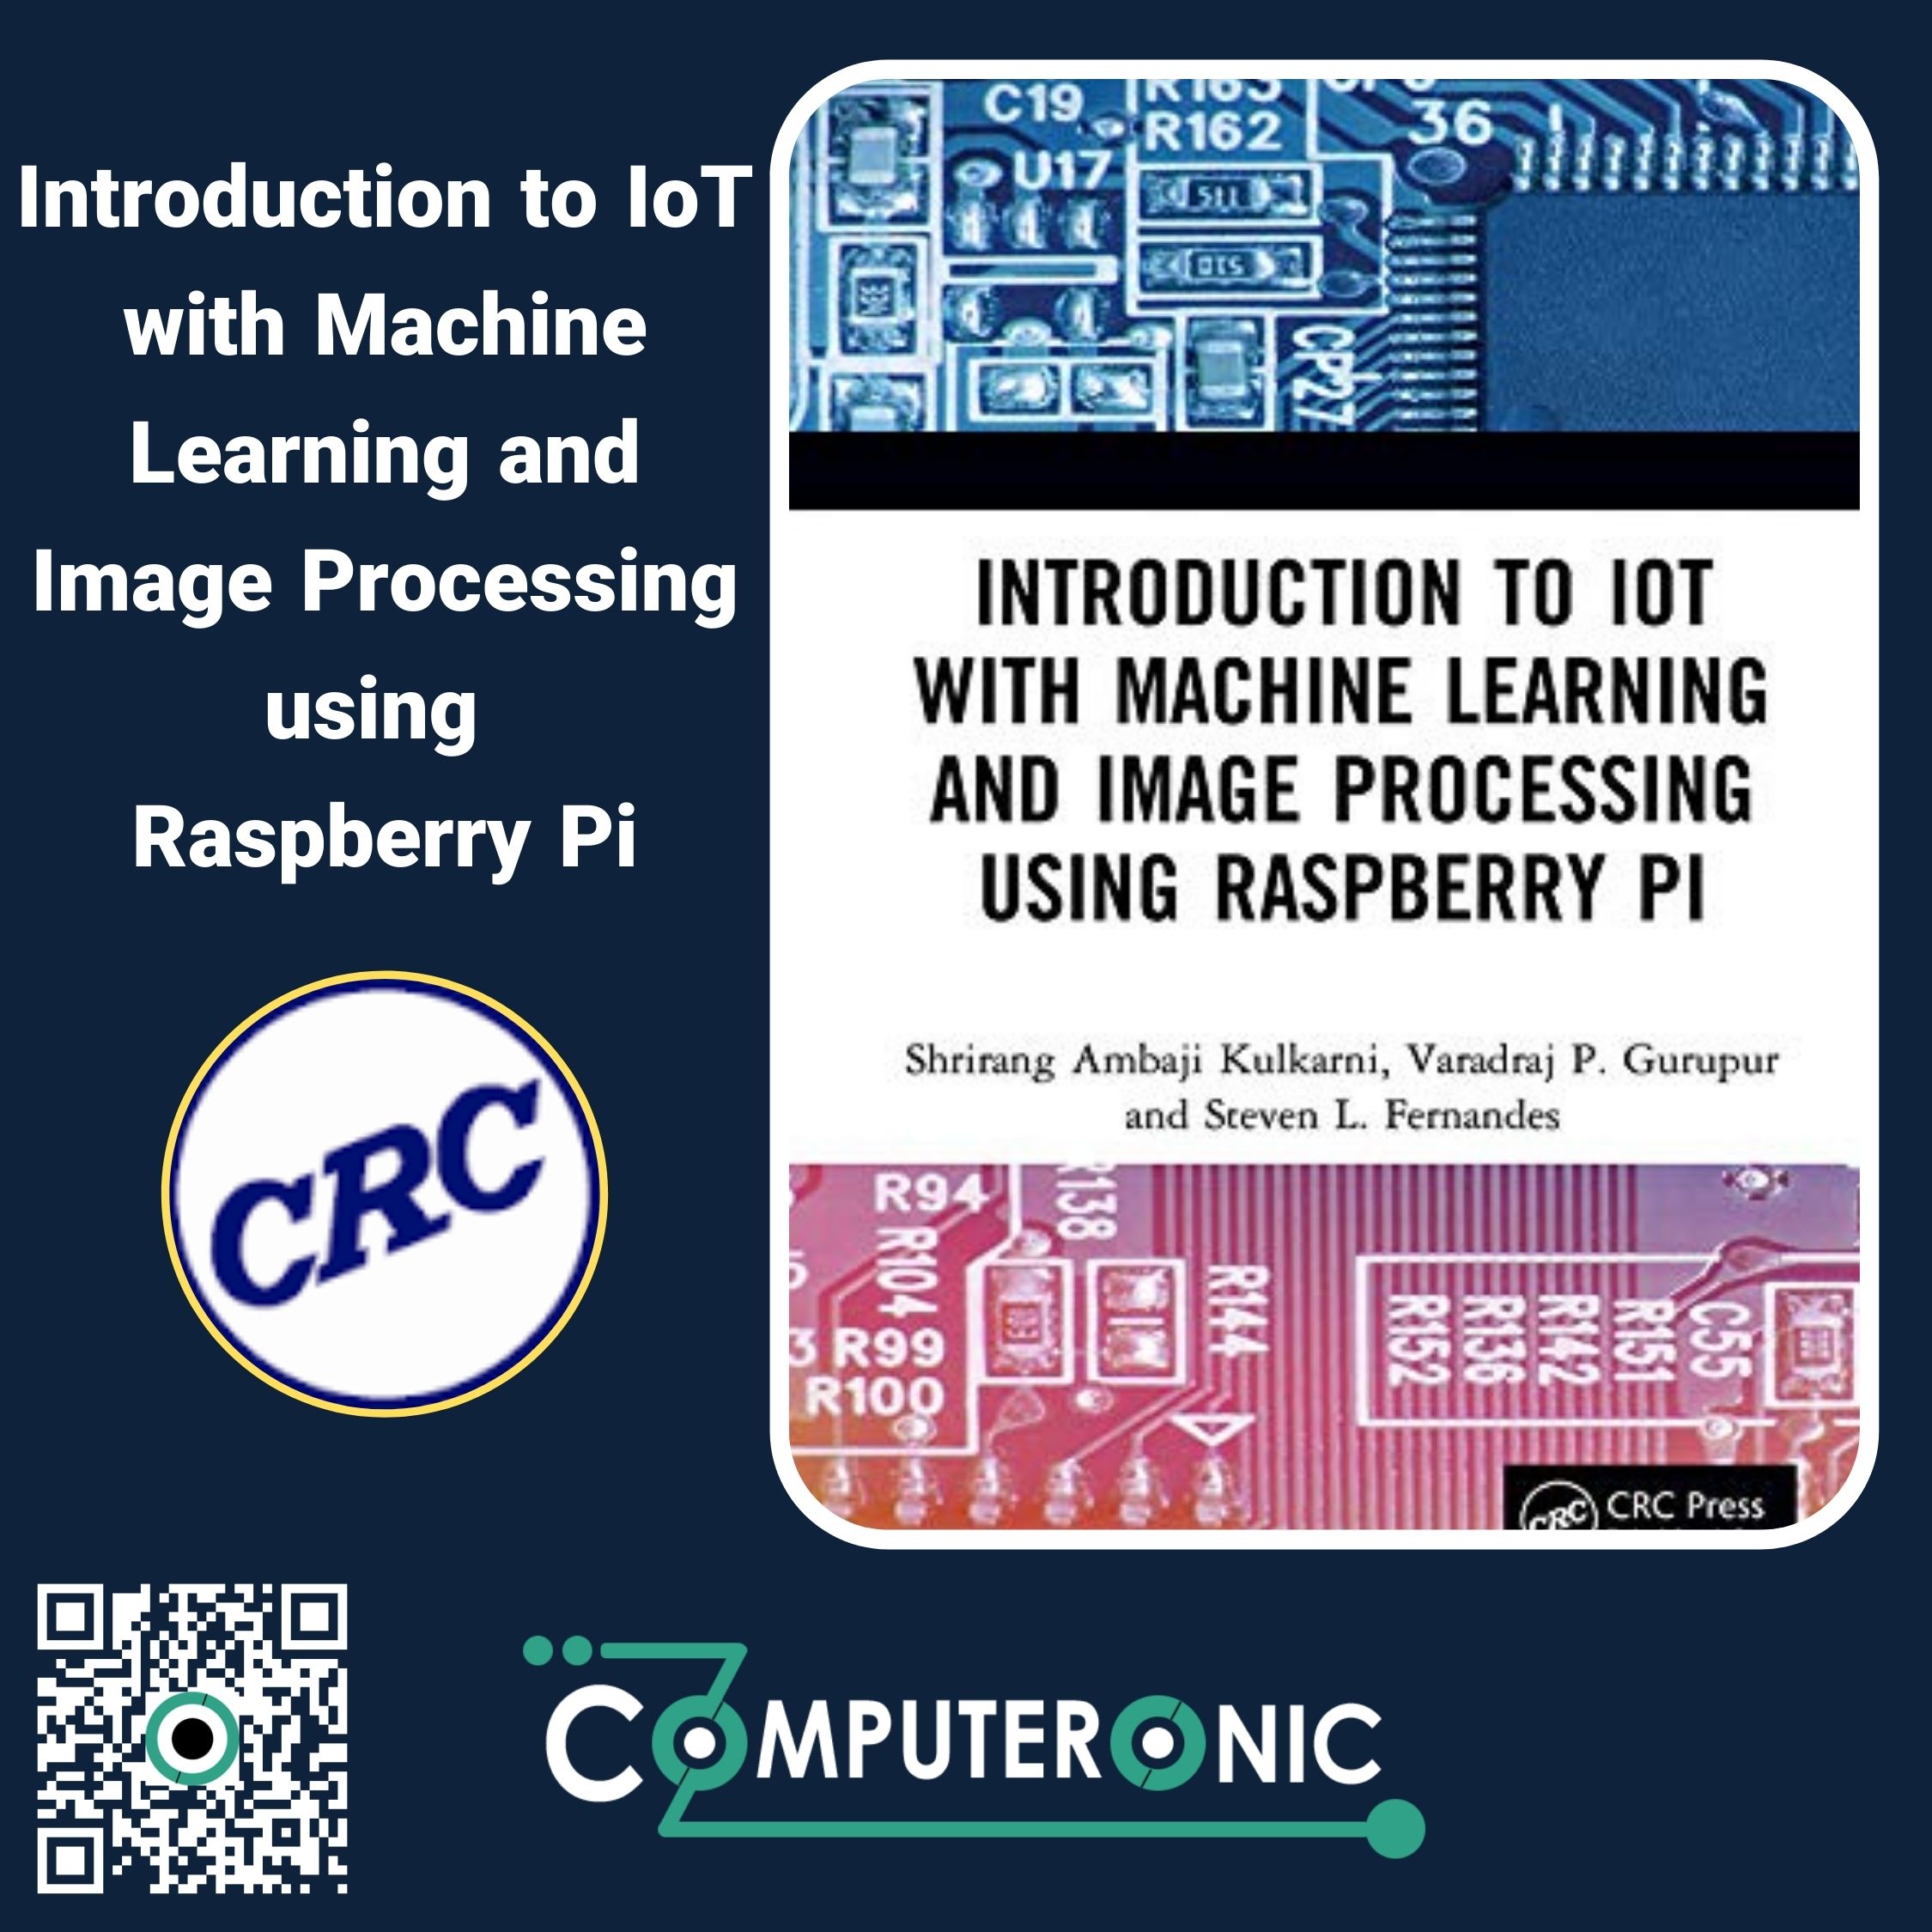 Introduction to IoT with Machine Learning and Image Processing using Raspberry Pi computeronic